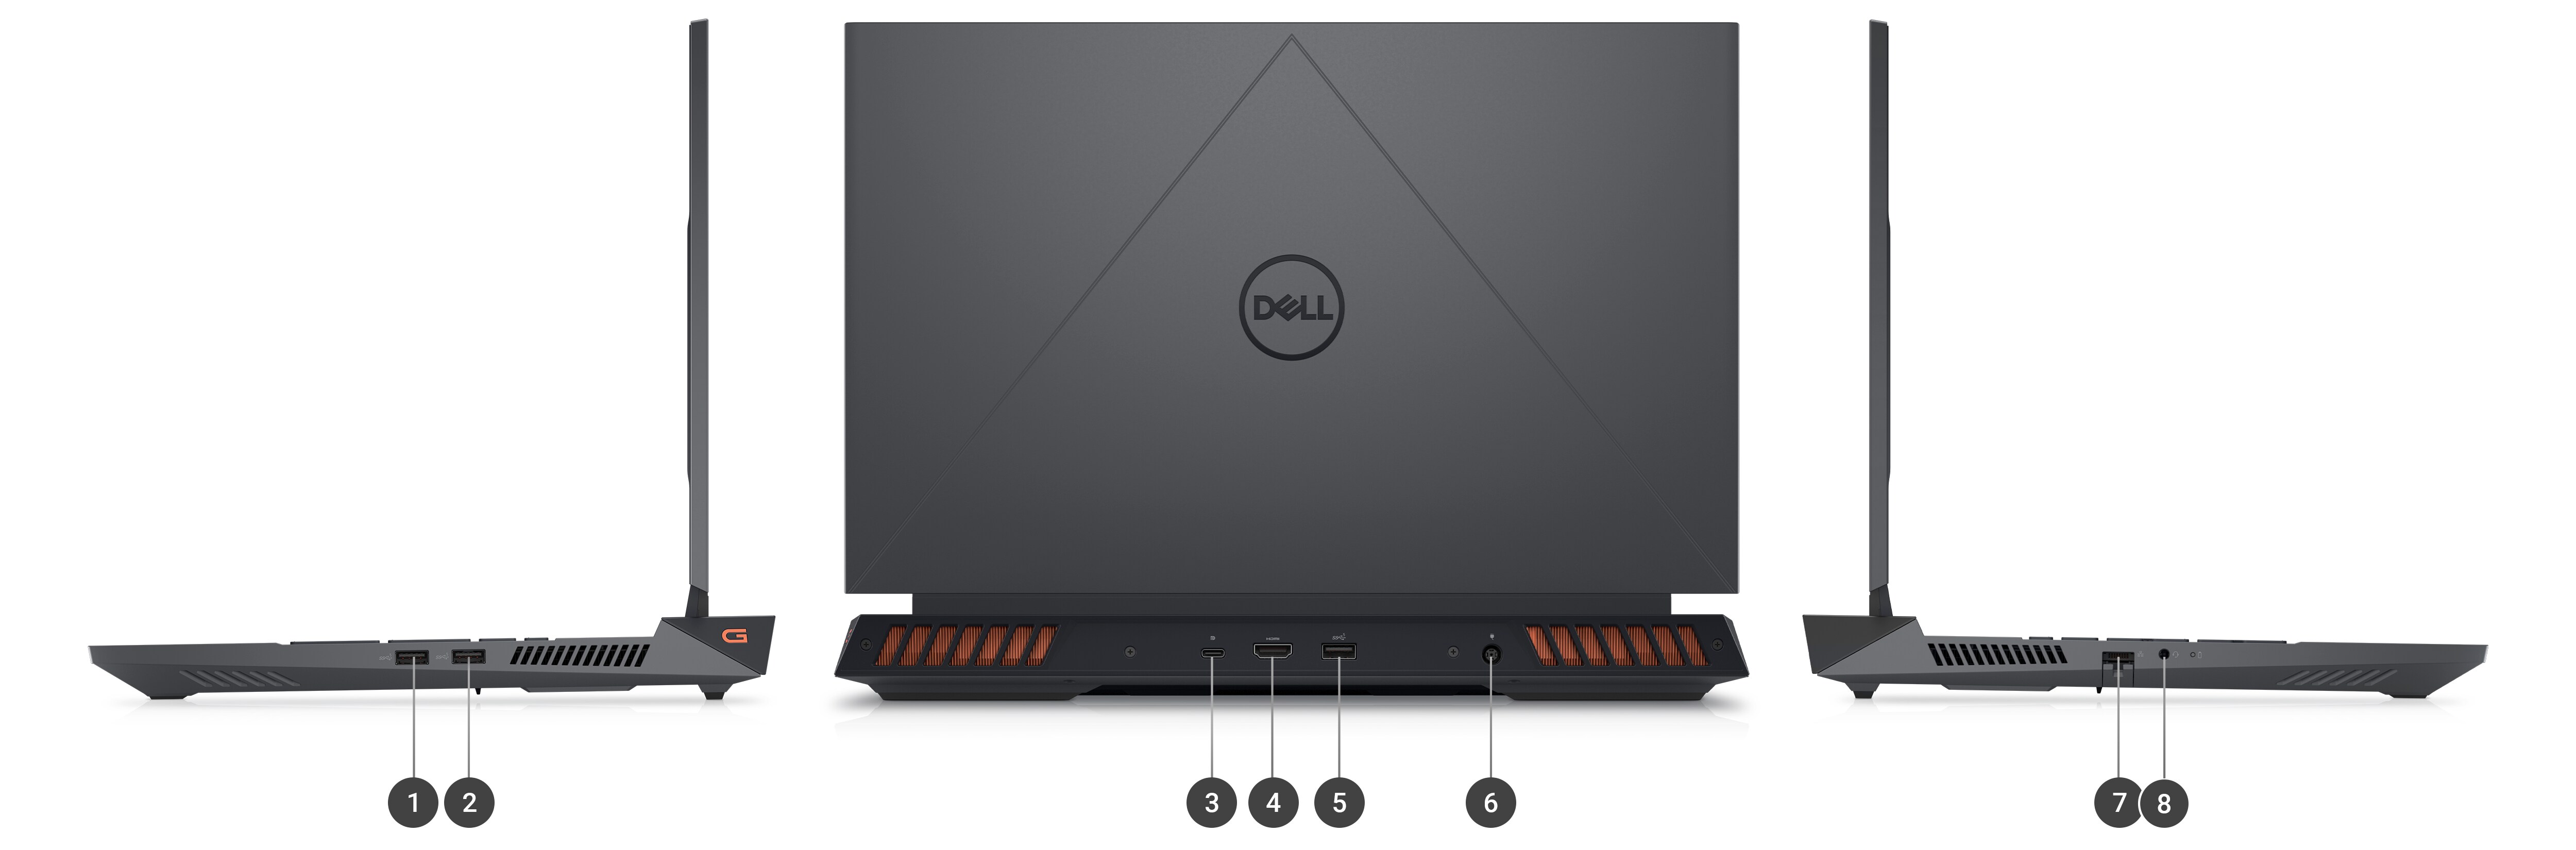 Dell G Series 15 5535 Gaming Laptop with numbers from 1 to 8 showing the product ports and slots.